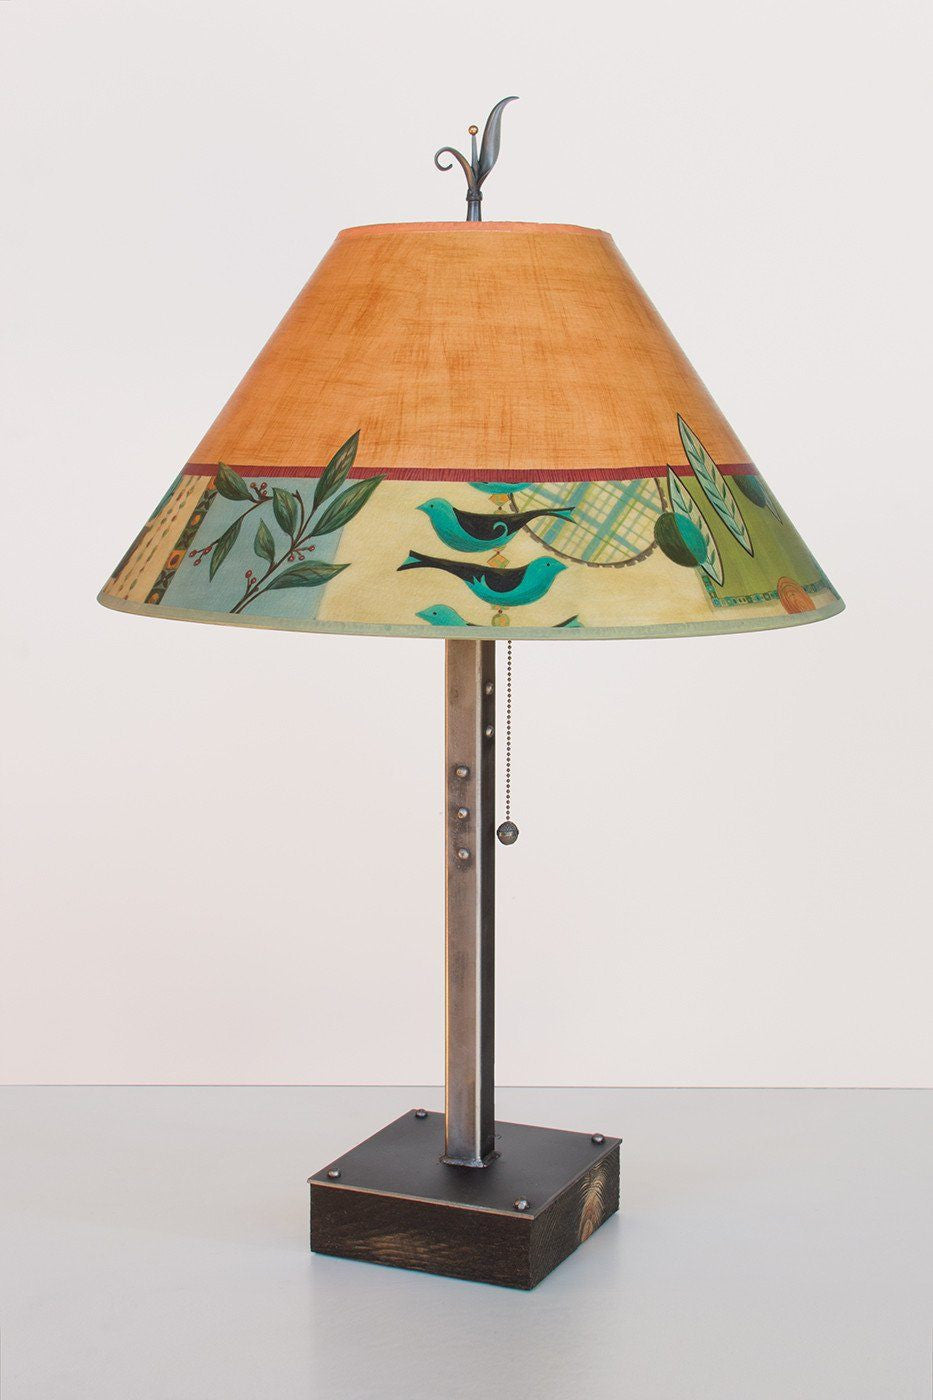 Steel Table Lamp on Wood with Large Conical Shade in New Capri Spice